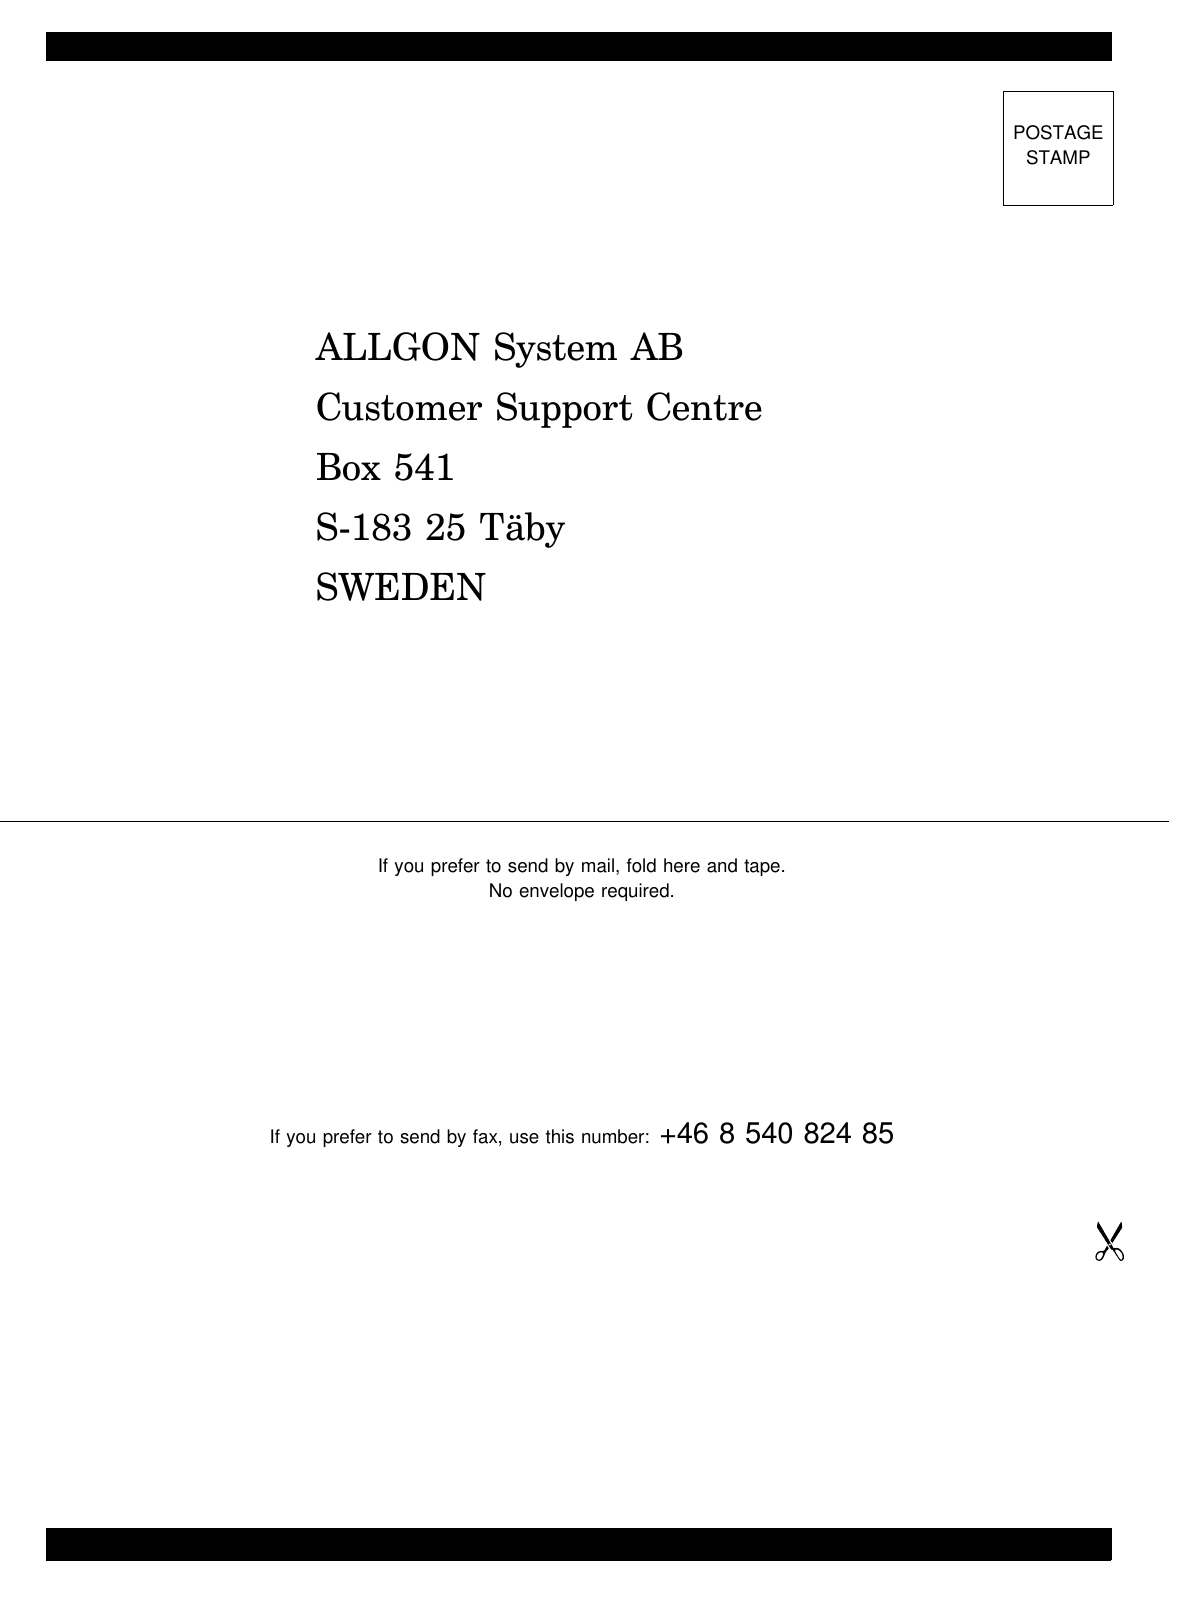 ALLGON System ABCustomer Support CentreBox 541S-183 25 TäbySWEDENIf you prefer to send by mail, fold here and tape.No envelope required.If you prefer to send by fax, use this number: +46 8 540 824 85POSTAGESTAMP ALLGON System AB QuestionnaireUser’s Manual VD202 90/EN Rev. 1A  1999-07 Q - 2